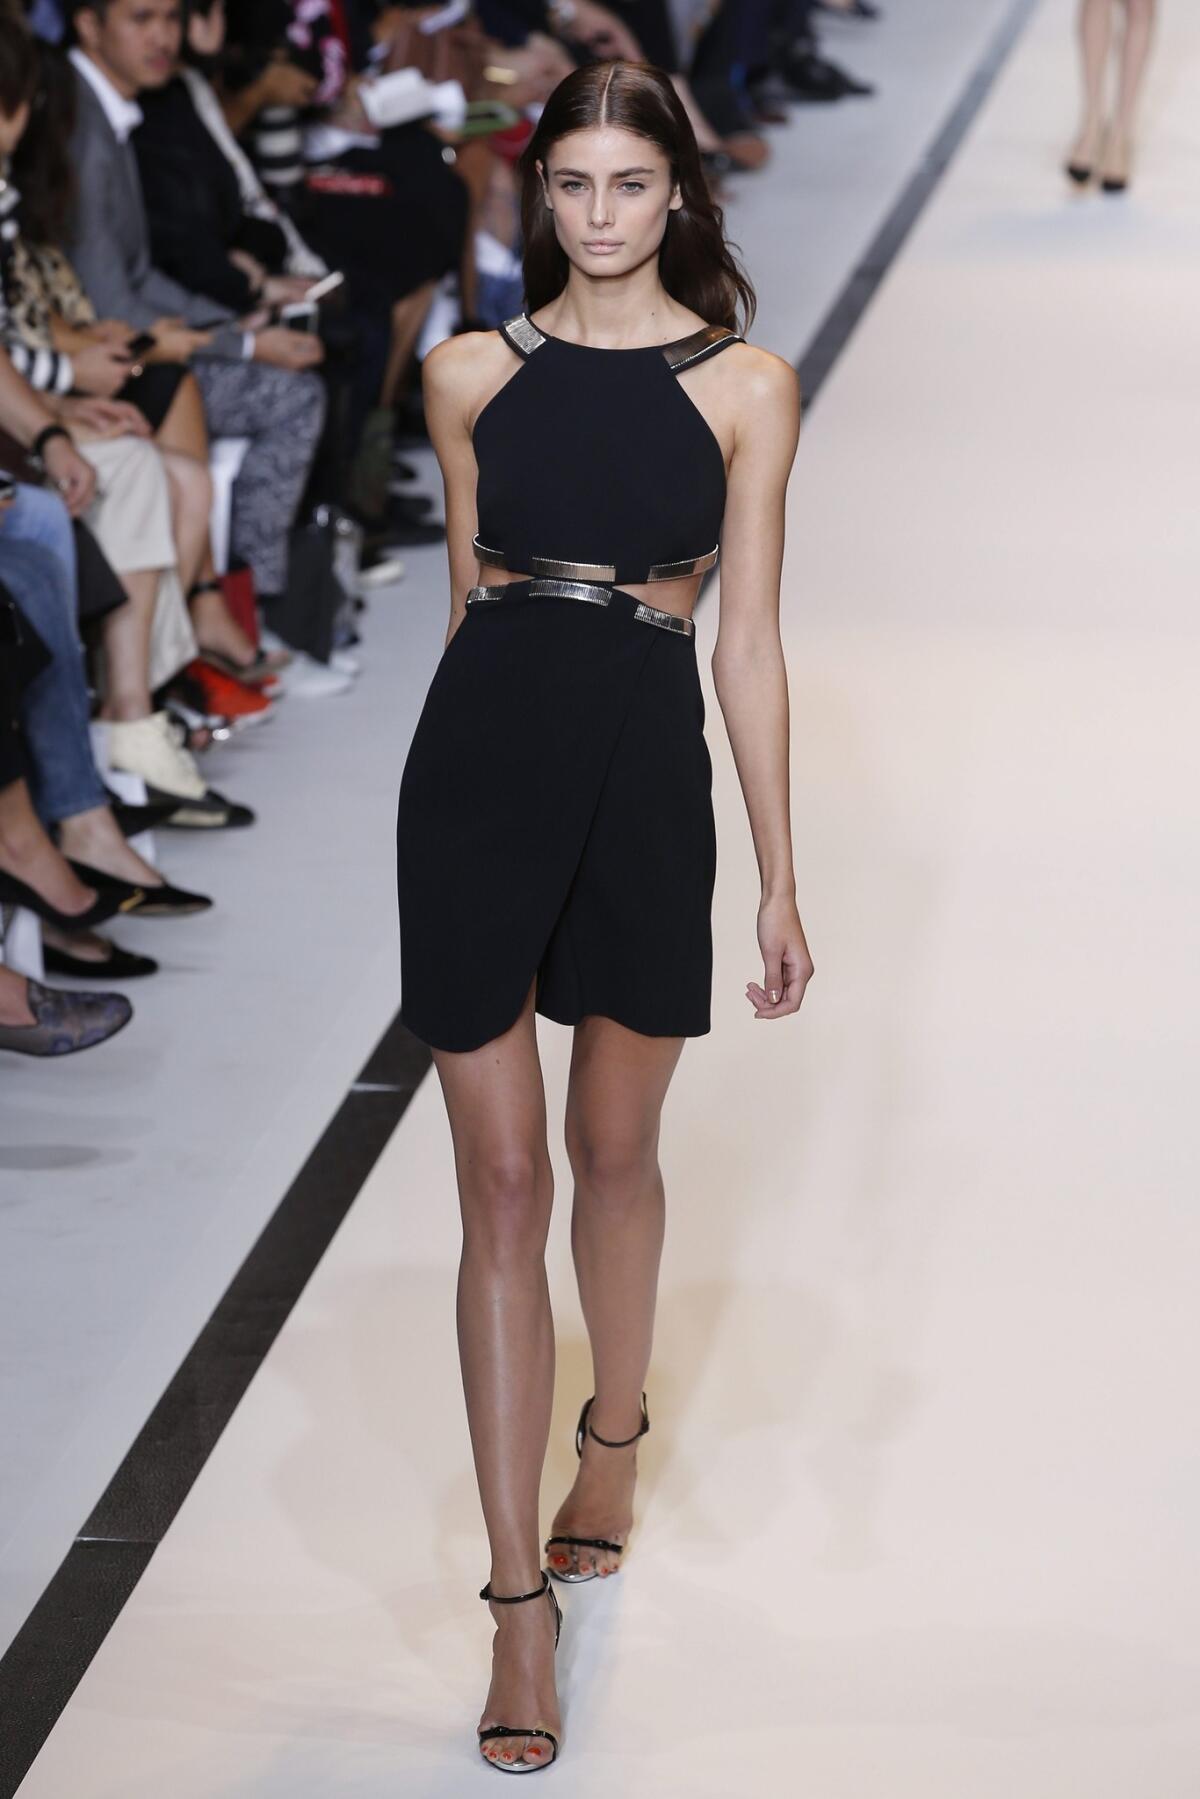 Paris Fashion Week: New day for Mugler brand - Los Angeles Times